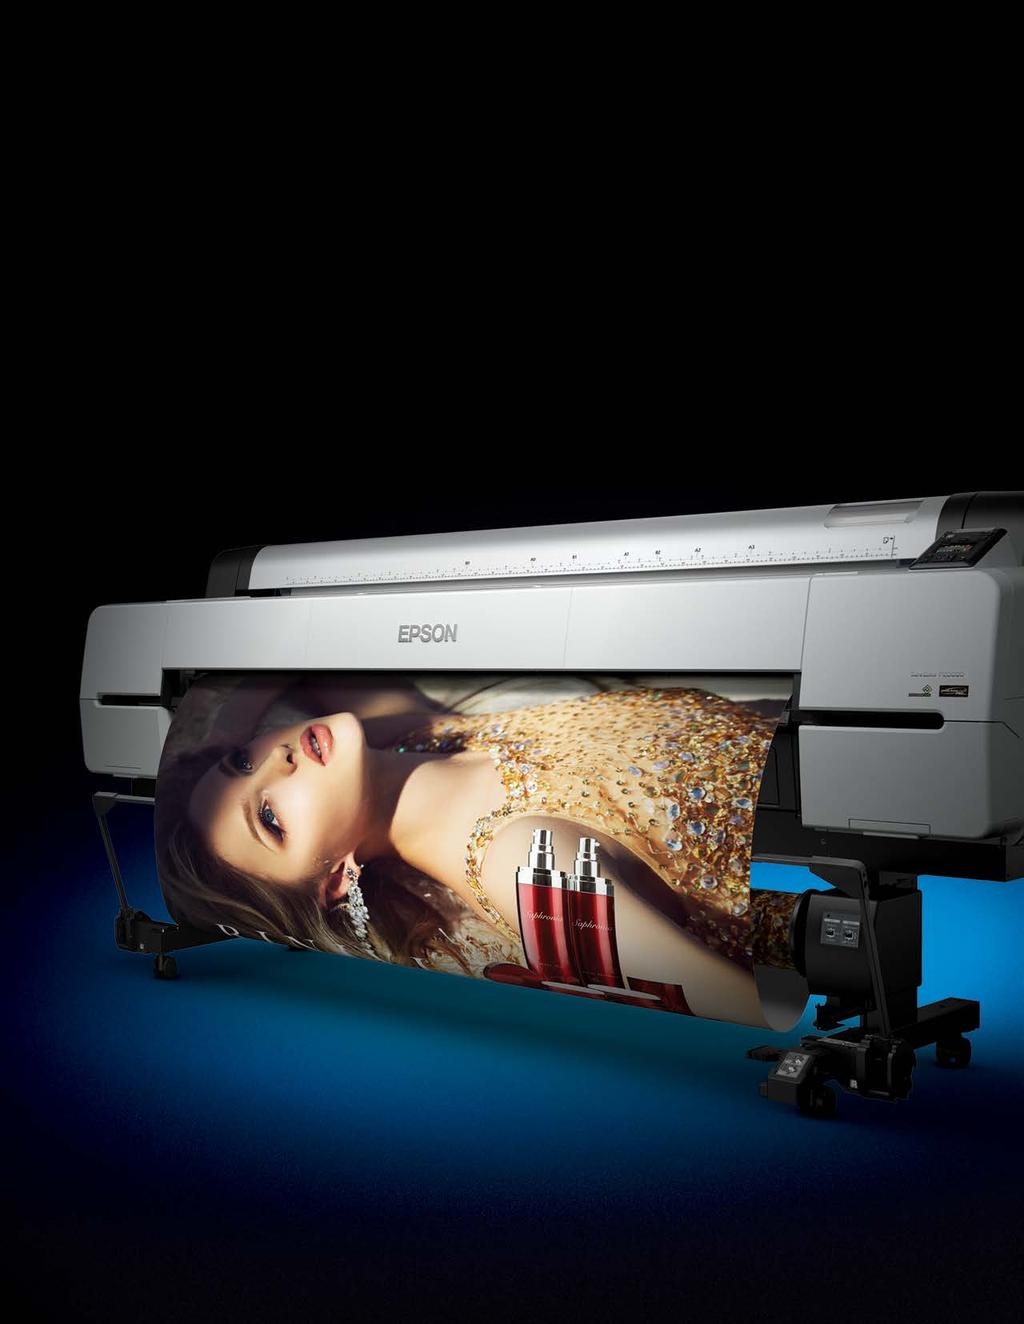 New Inductive Media Roller System The printer s all-new roll-loading process allows for simple and accurate front-top roll loading with minimal errors or skewing.